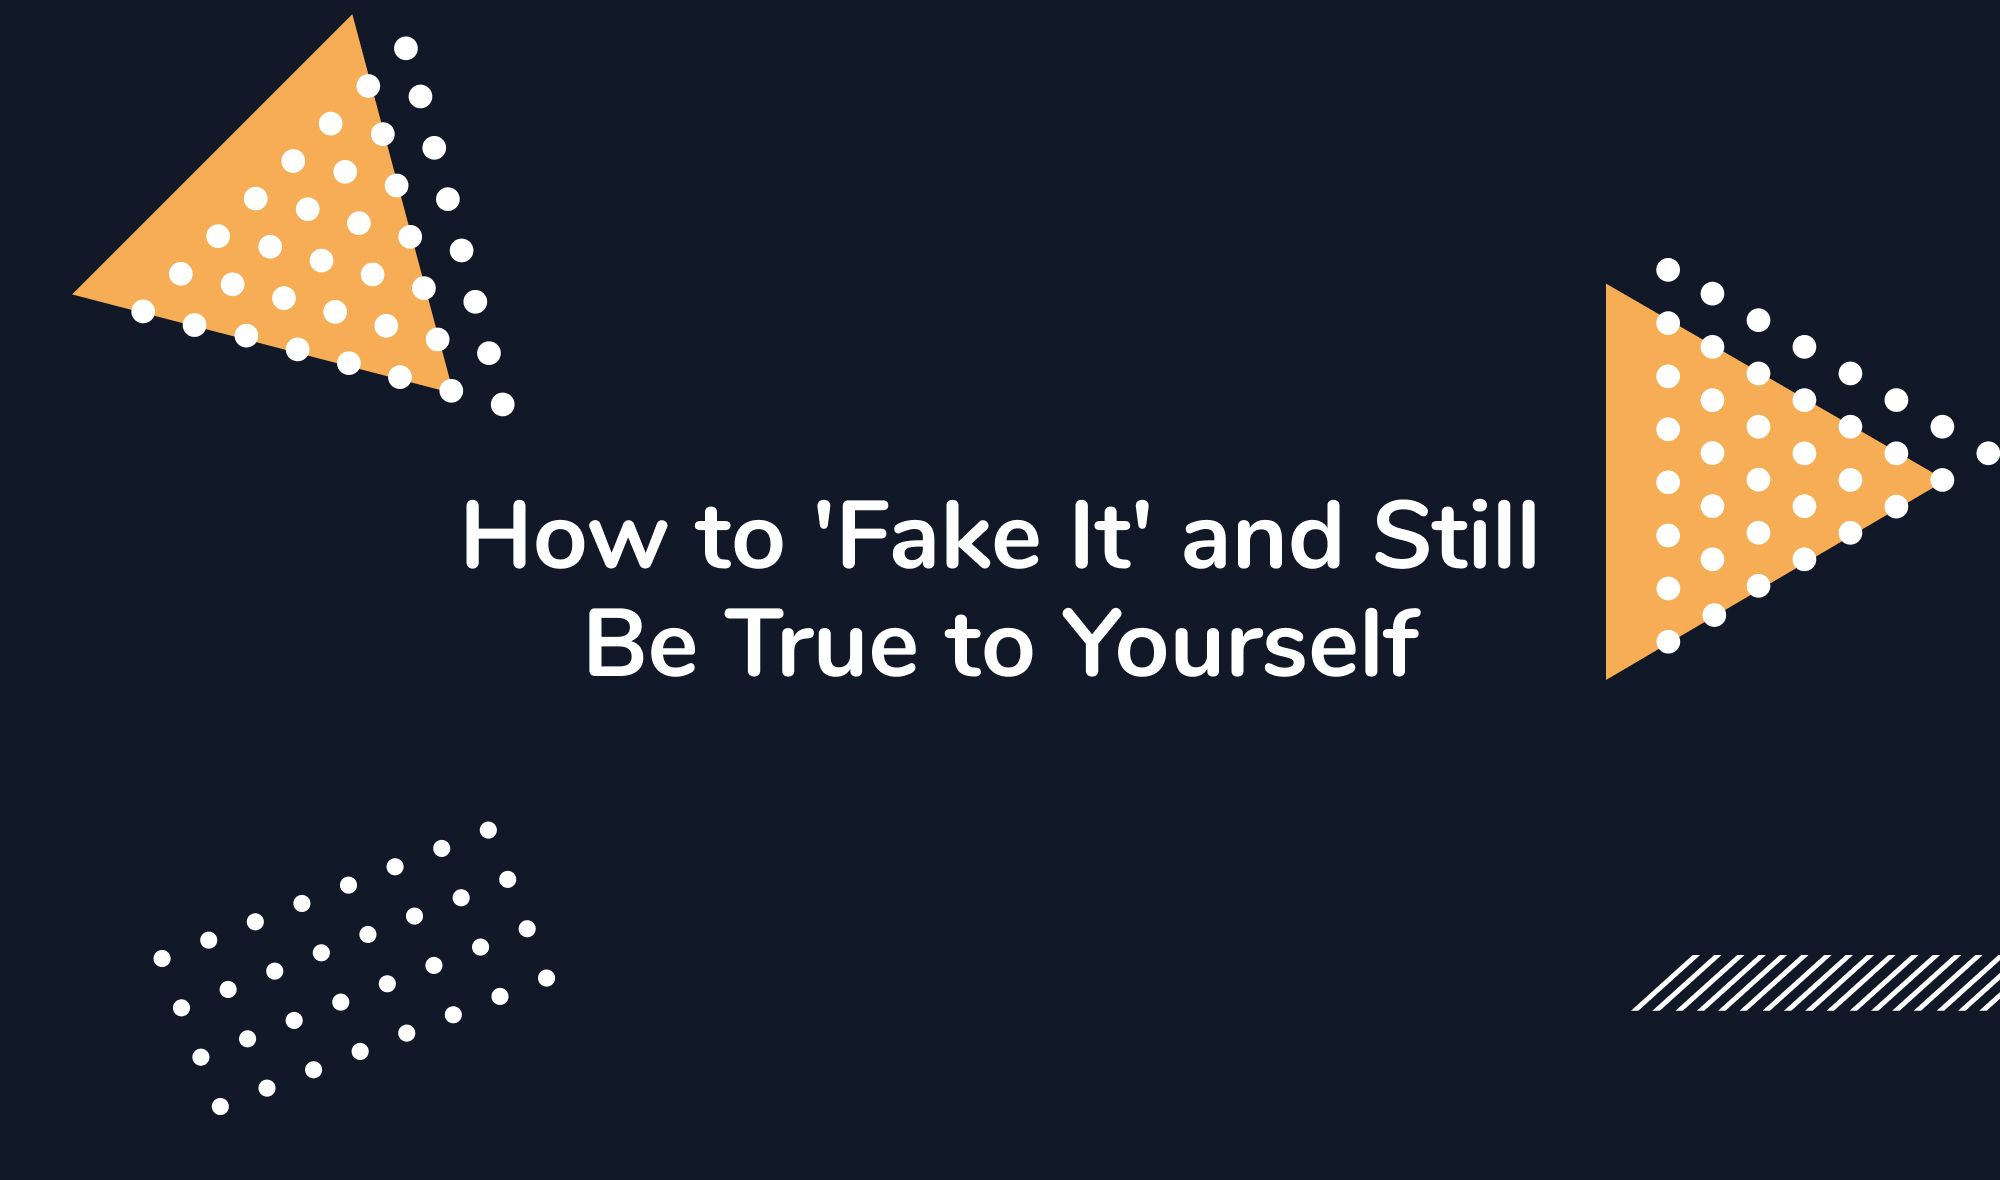 How to 'Fake It' and Still Be True to Yourself